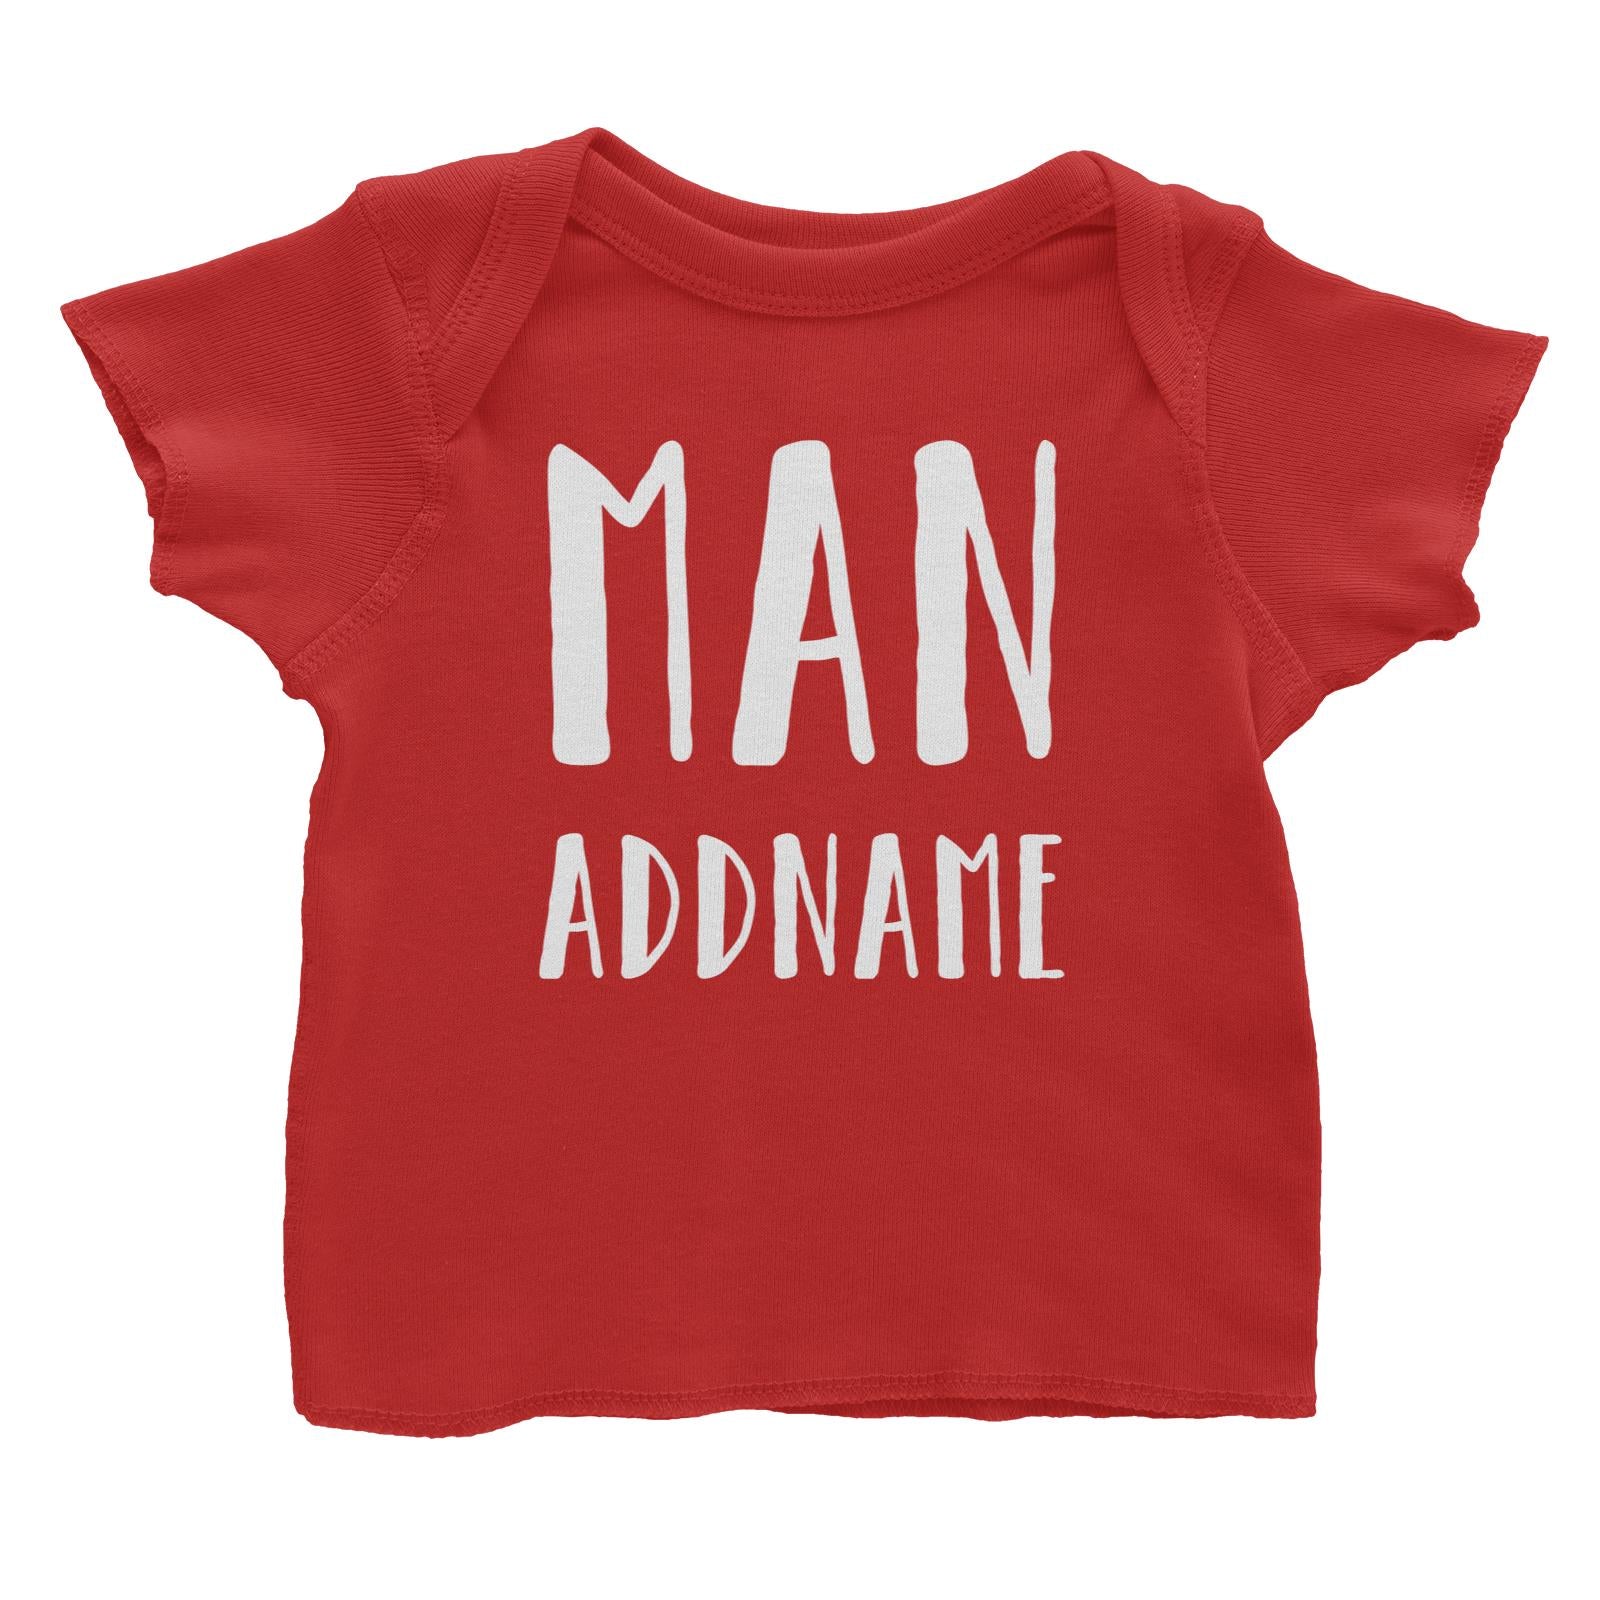 Matching Dog And Owner Man Addname Baby T-Shirt